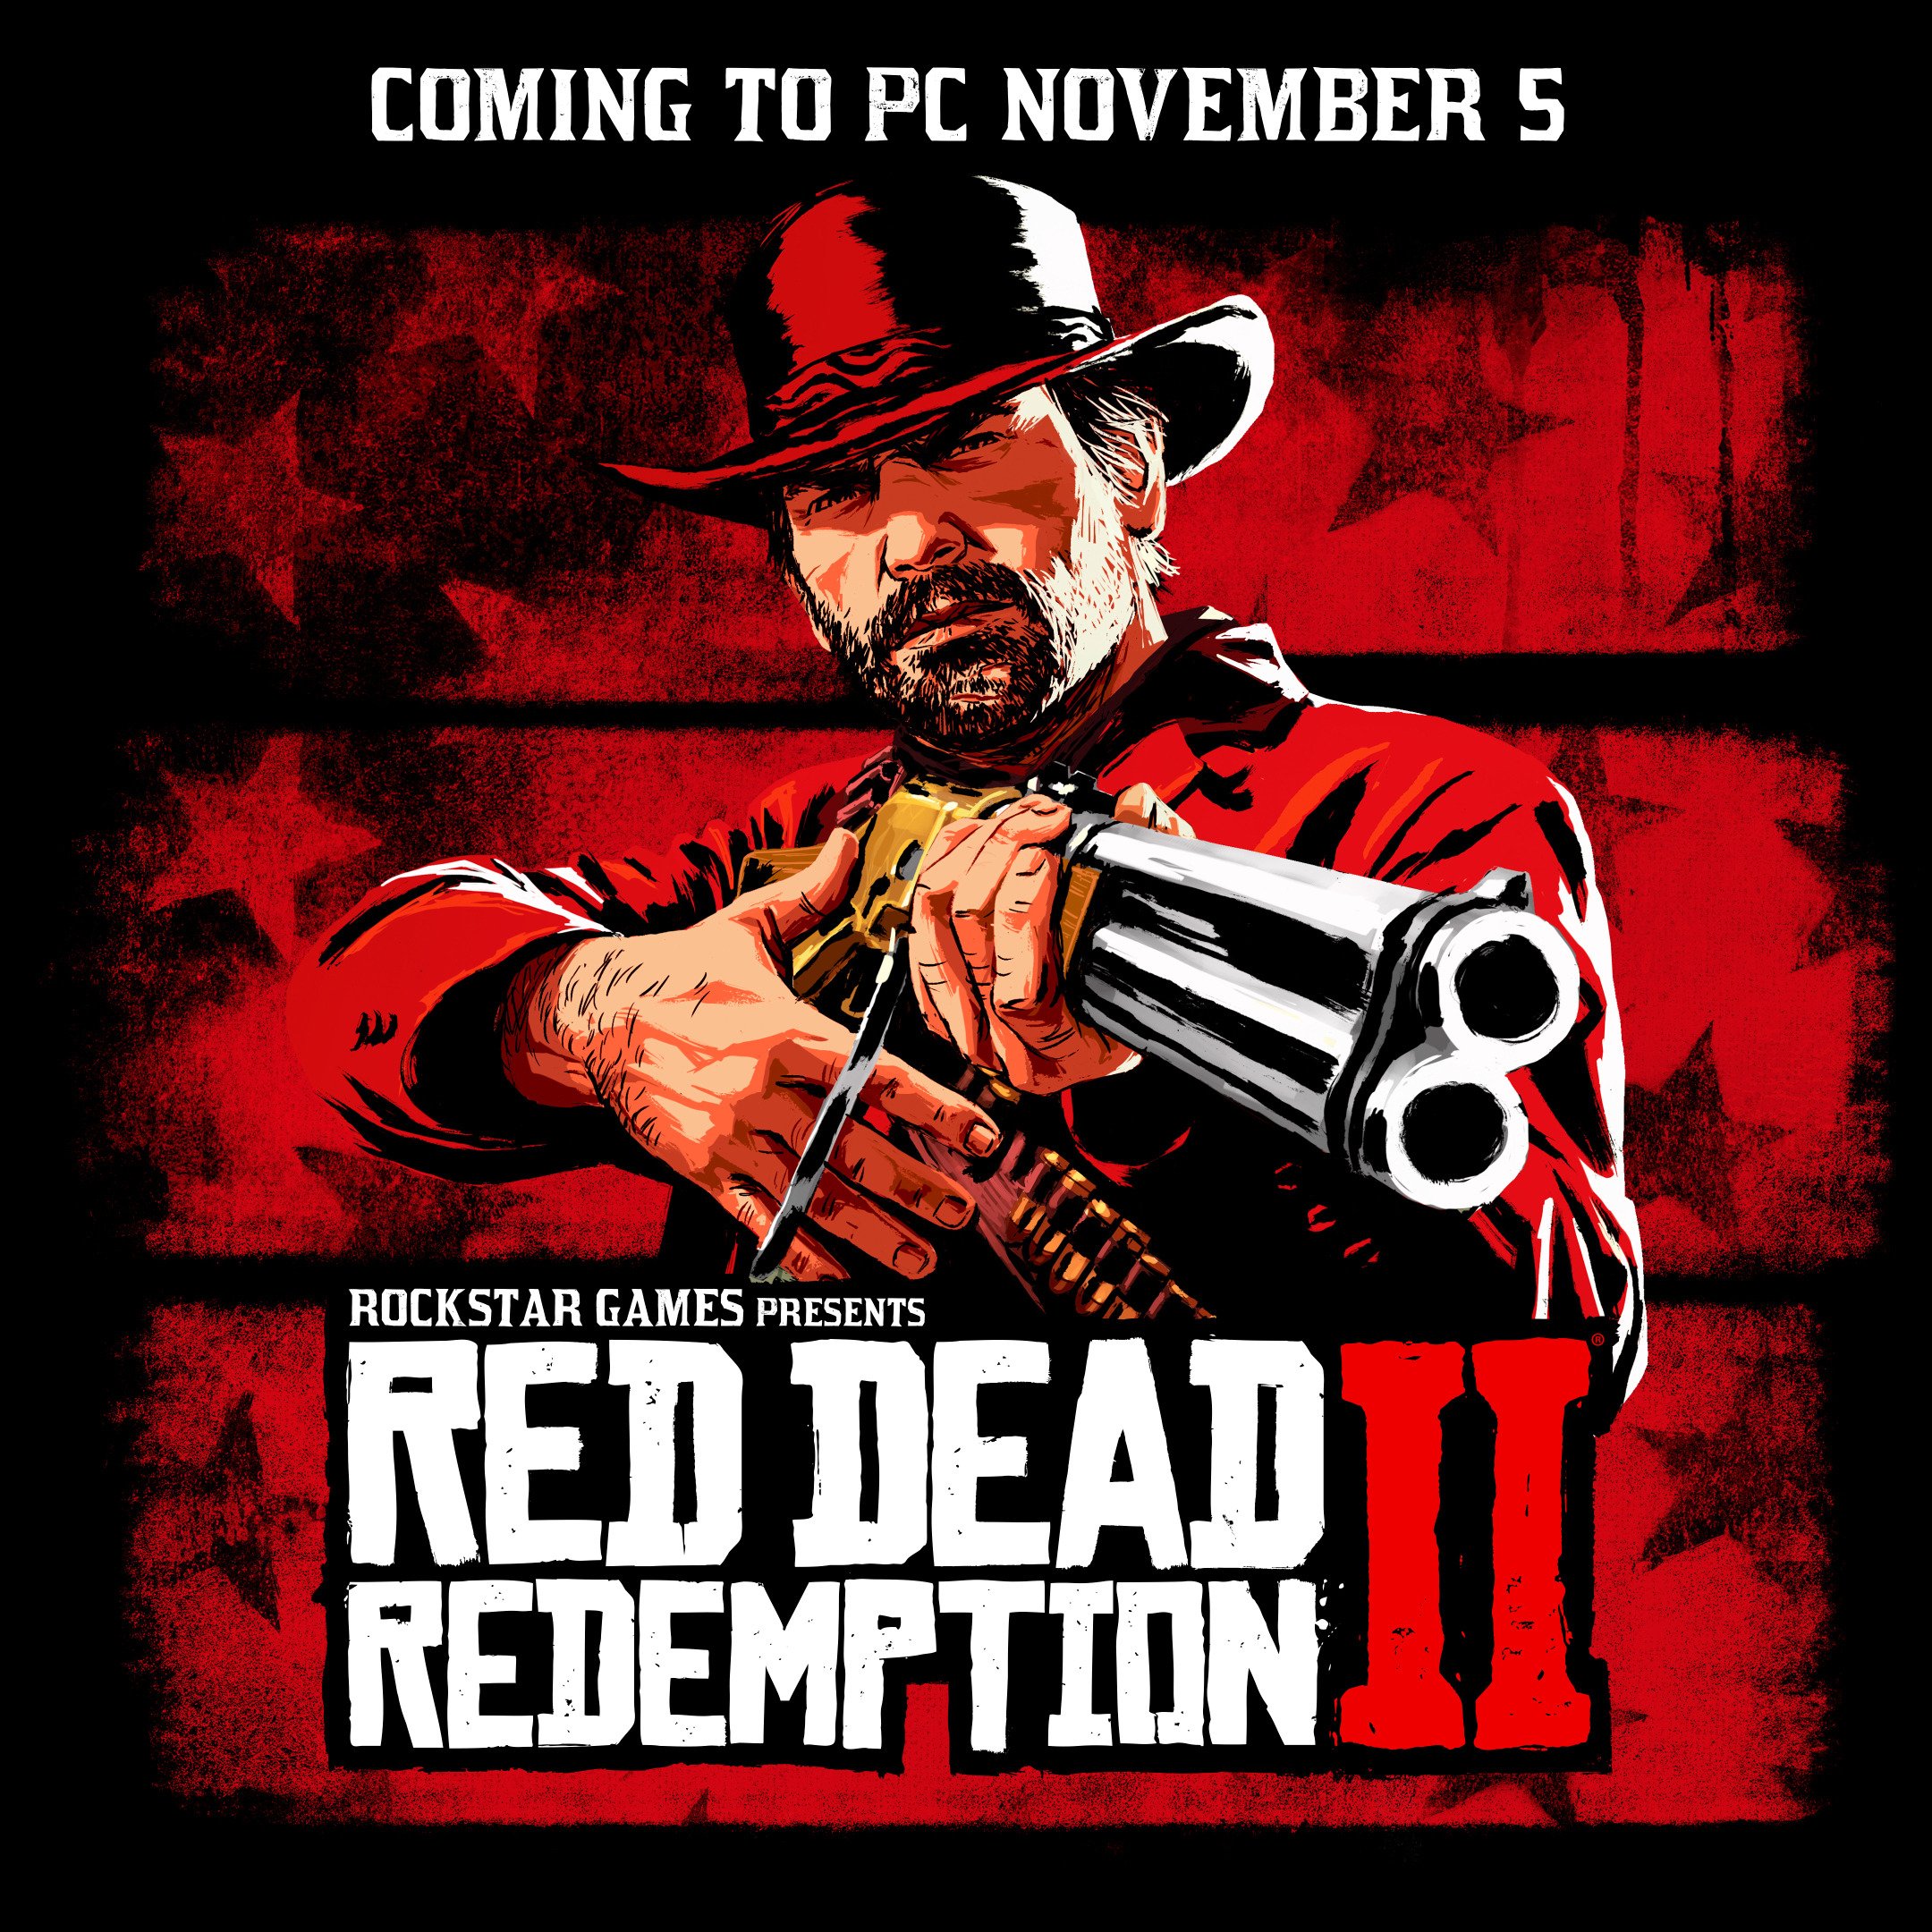 Rockstar Games Twitter: "RED DEAD REDEMPTION 2 is to PC November 5th https://t.co/8jg8WeVvQ8" / Twitter